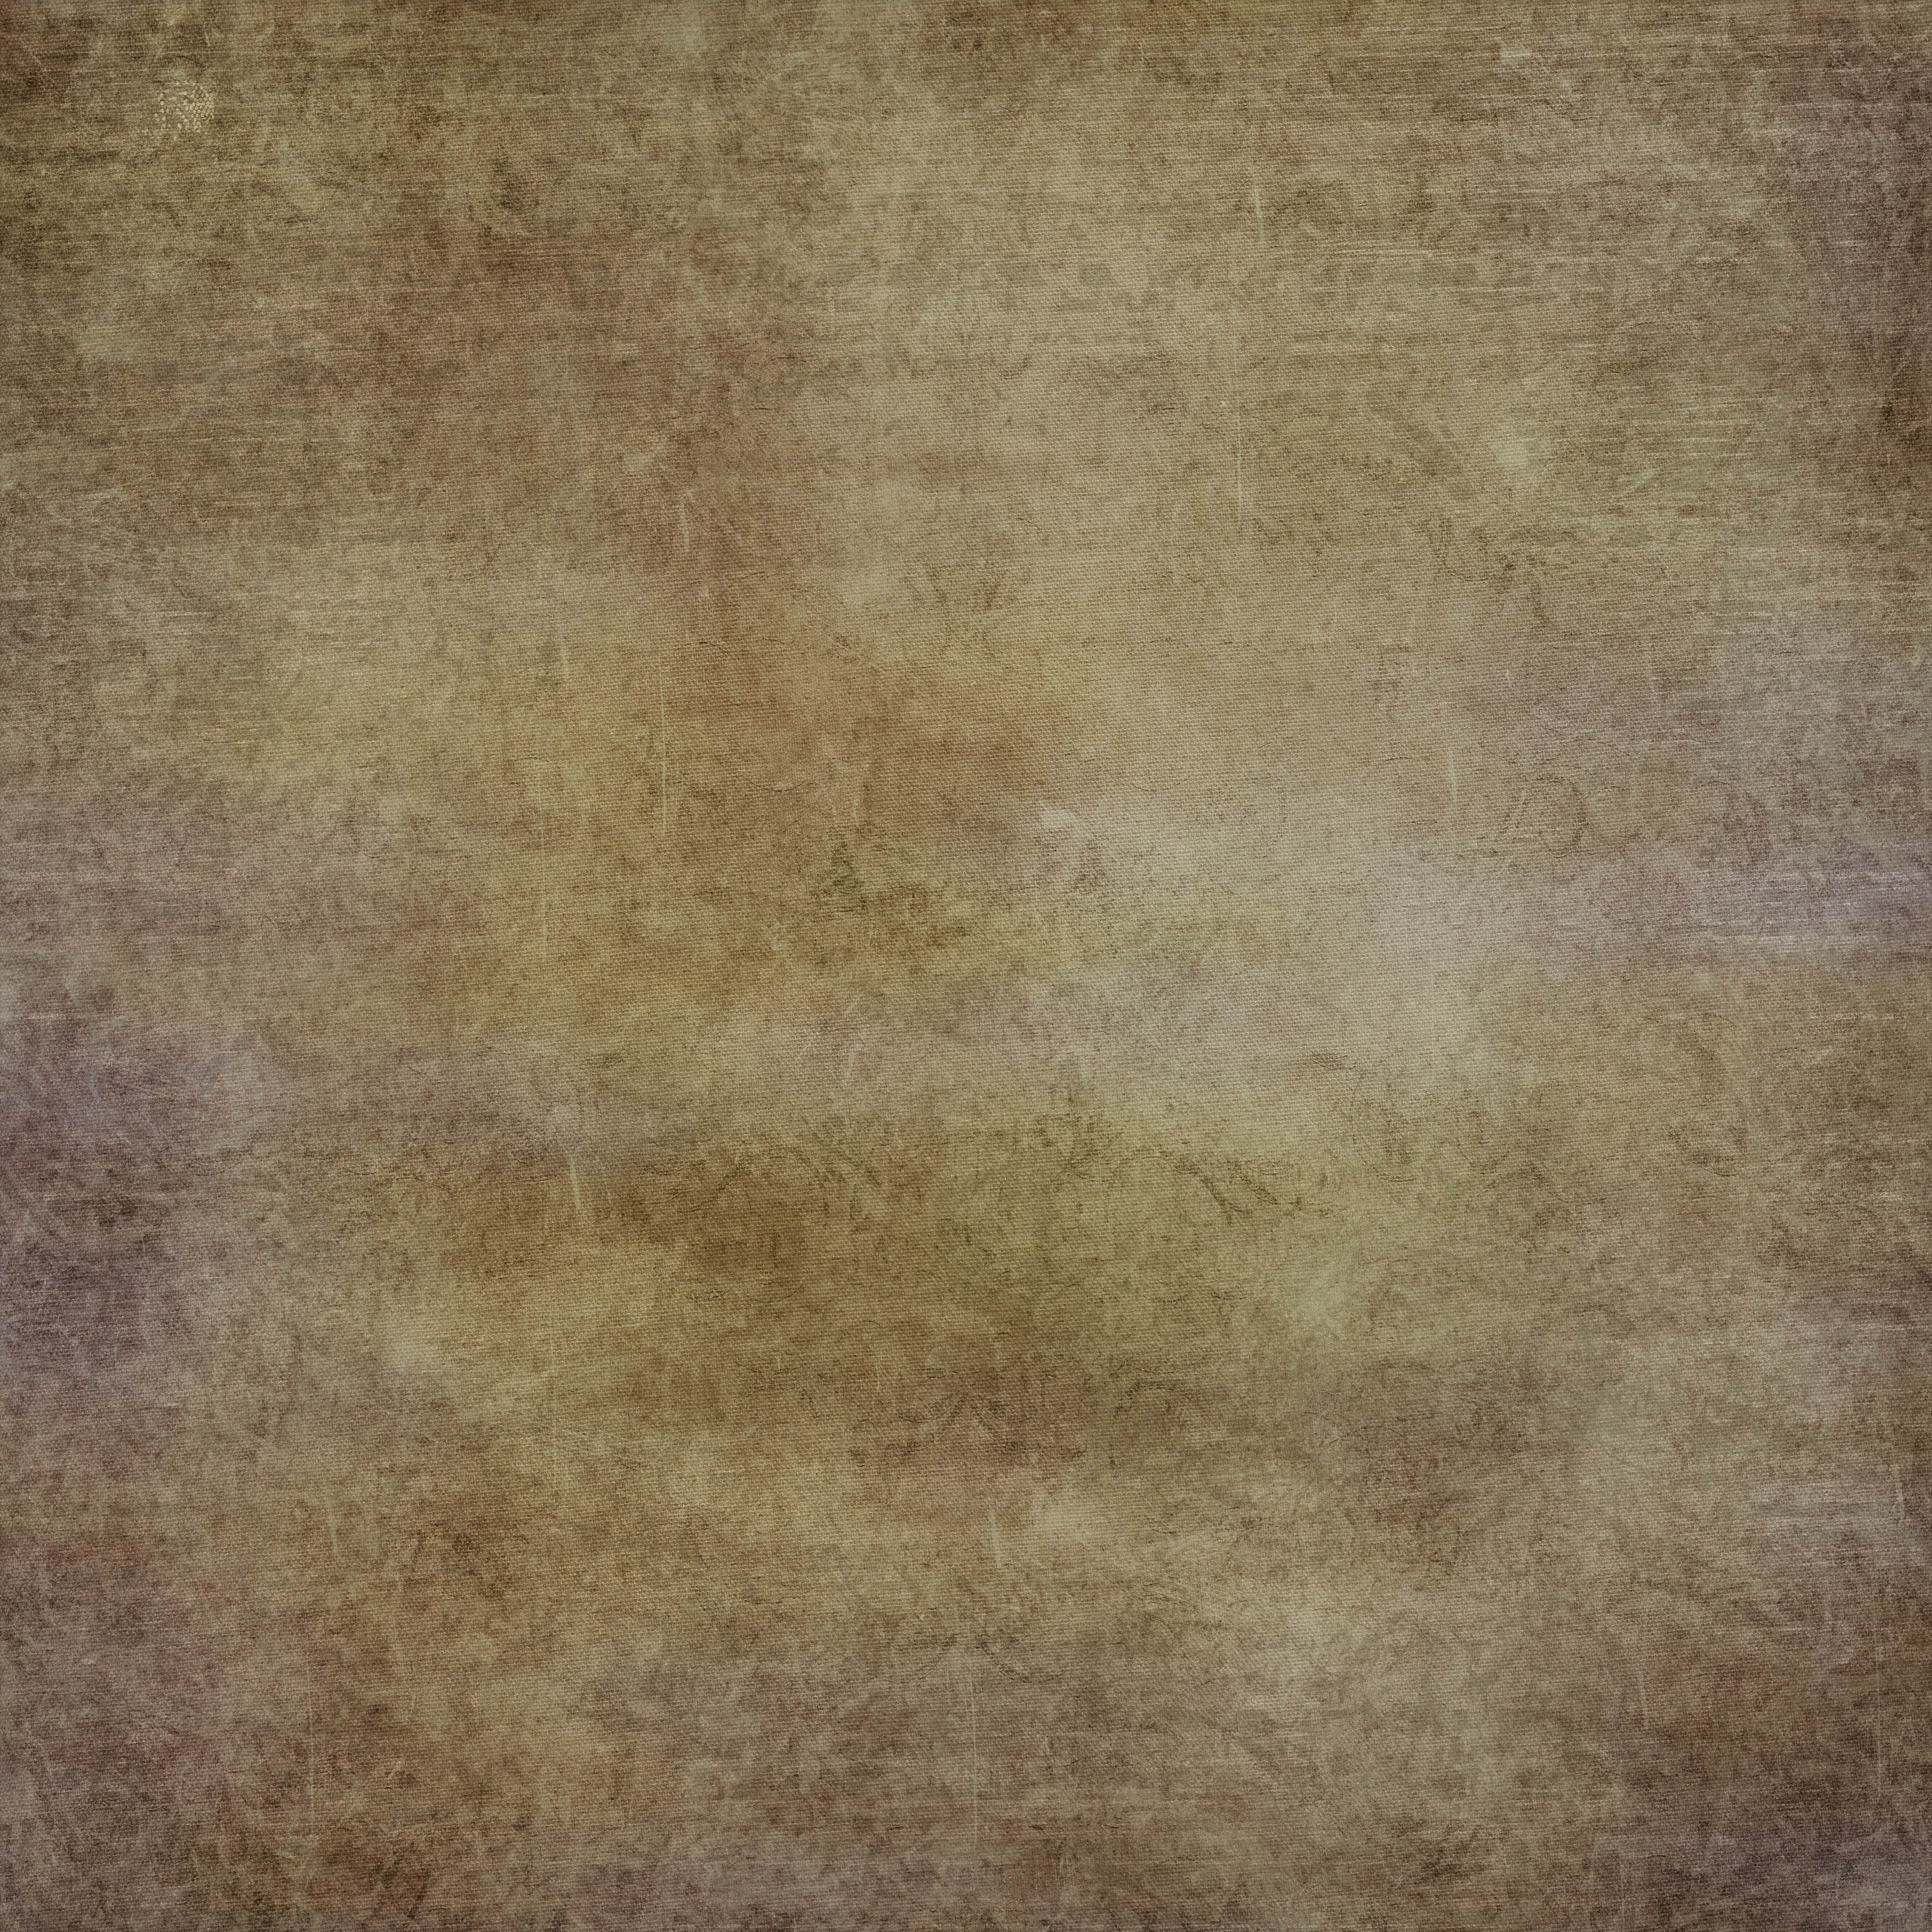 Brown Mottled Background, Ornate, Repetition, Repeat, Renaissance, HQ Photo